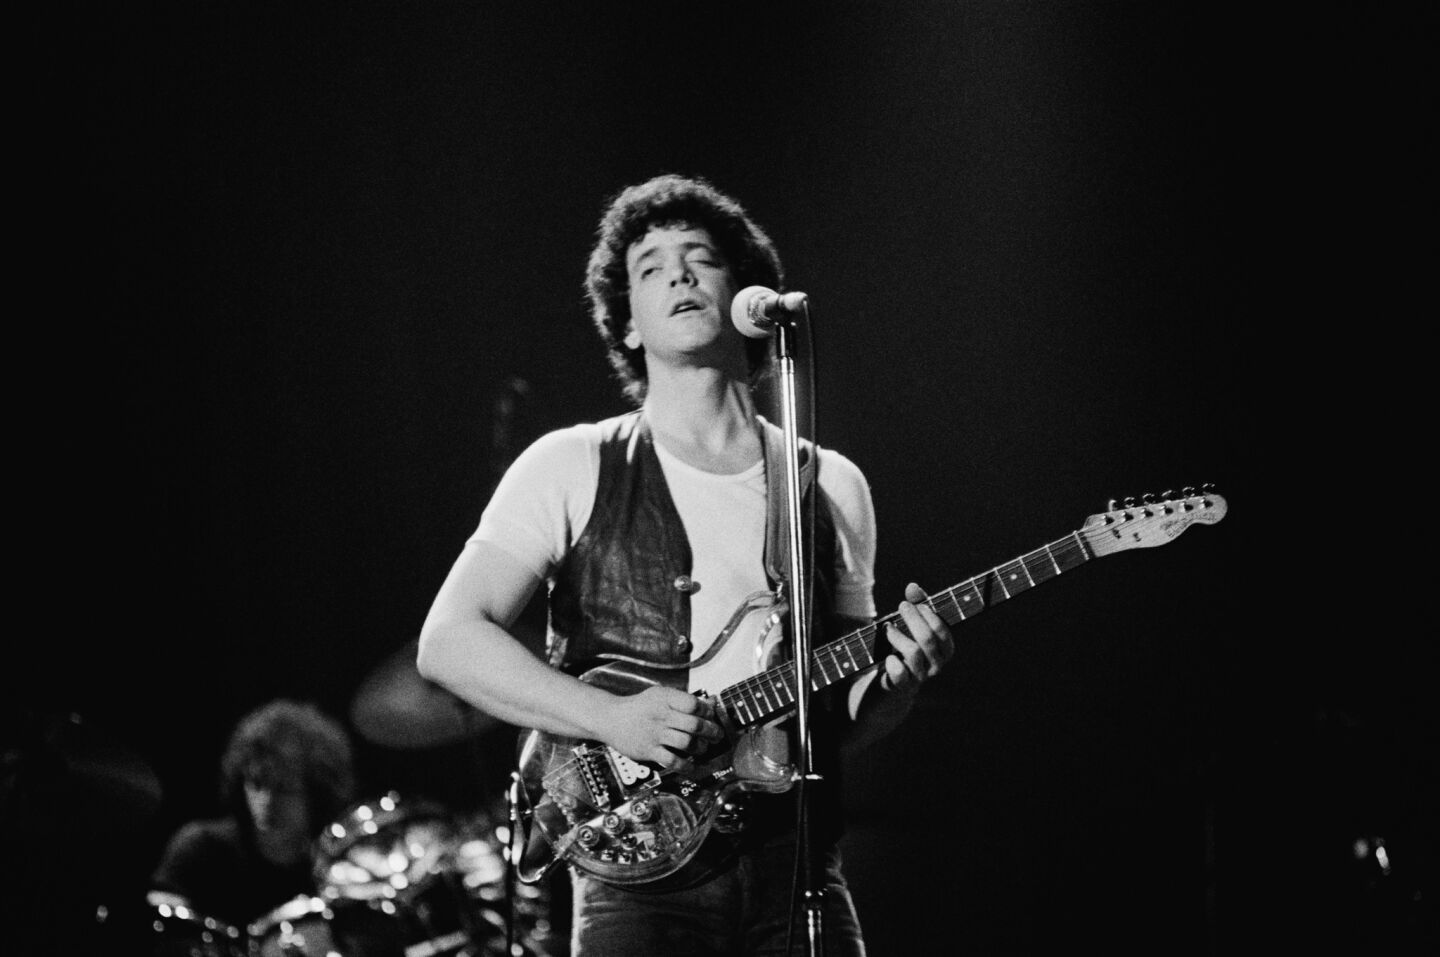 Playing a plexiglass guitar, Lou Reed performs at the Hammersmith Odeon in London in 1975.